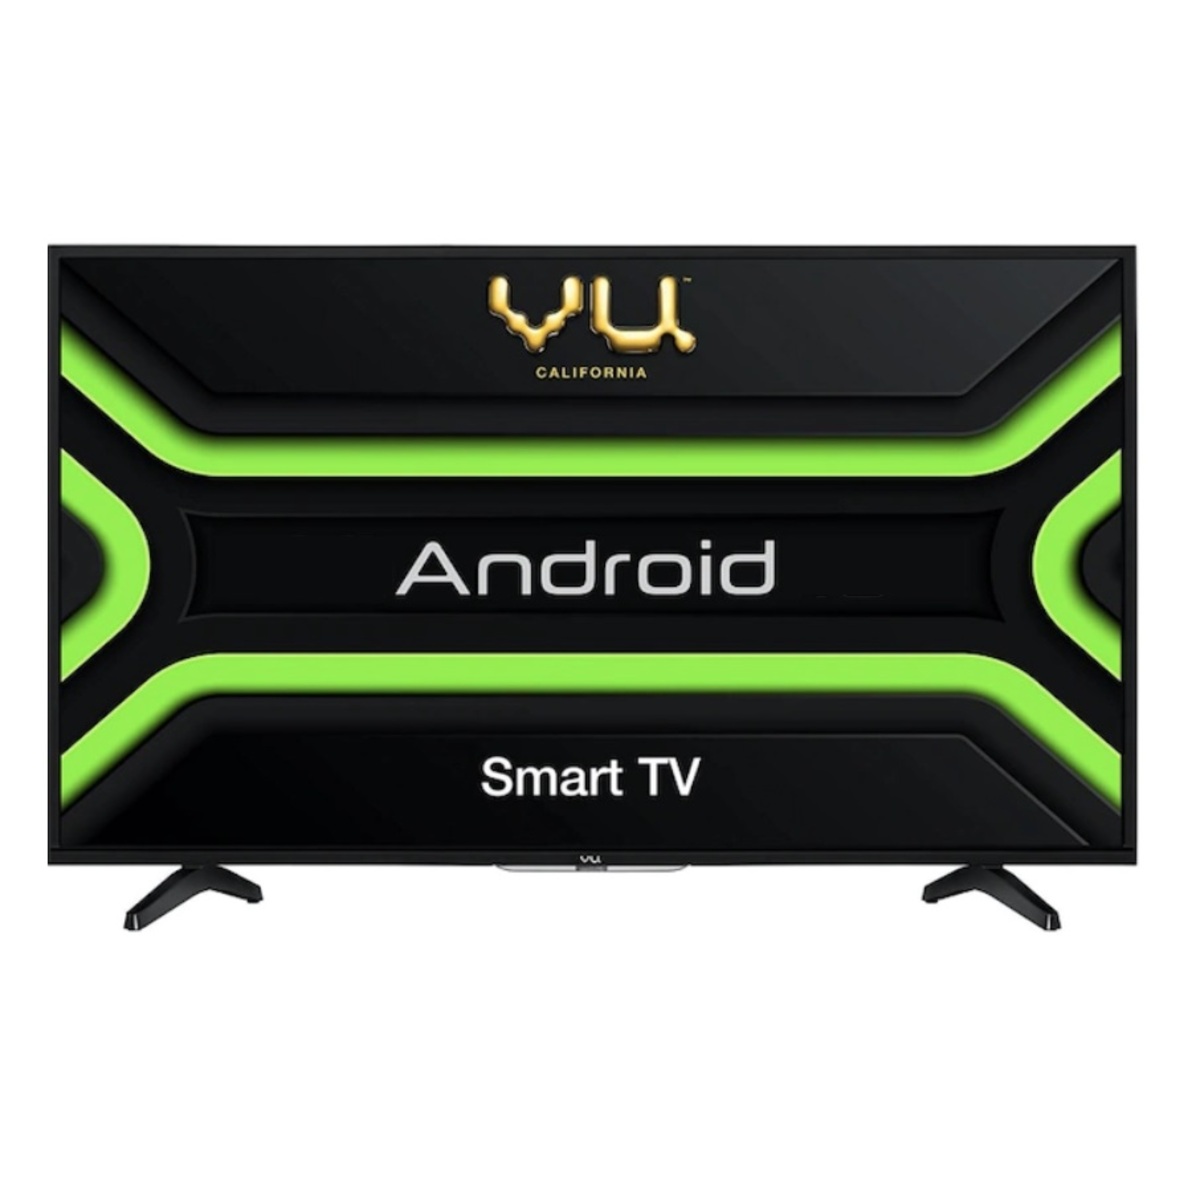 VU 4K Ultra HD LED Smart TV Android 9 Pie 43PM 43"